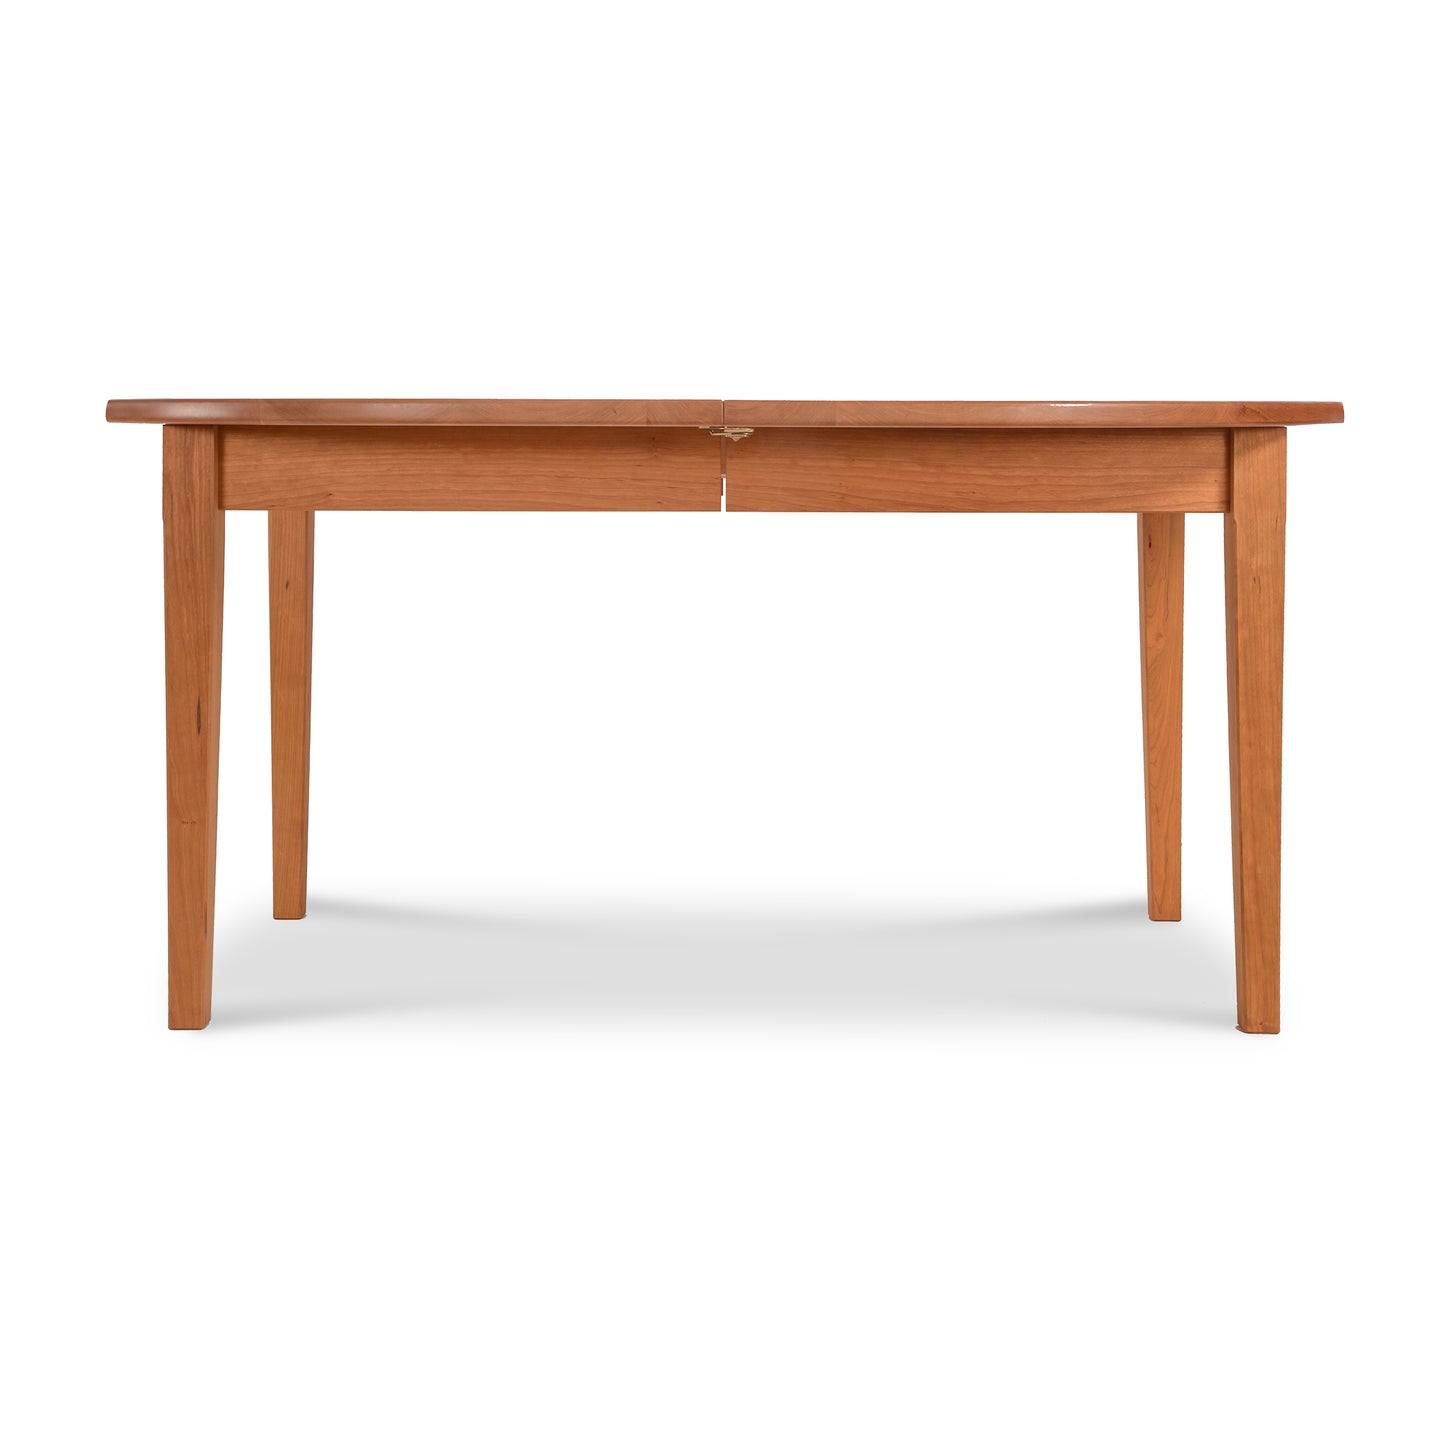 A Maple Corner Woodworks Vermont Shaker Oval Extension Dining Table isolated on a white background, featuring a simple, sturdy design with four straight legs and a rectangular top.